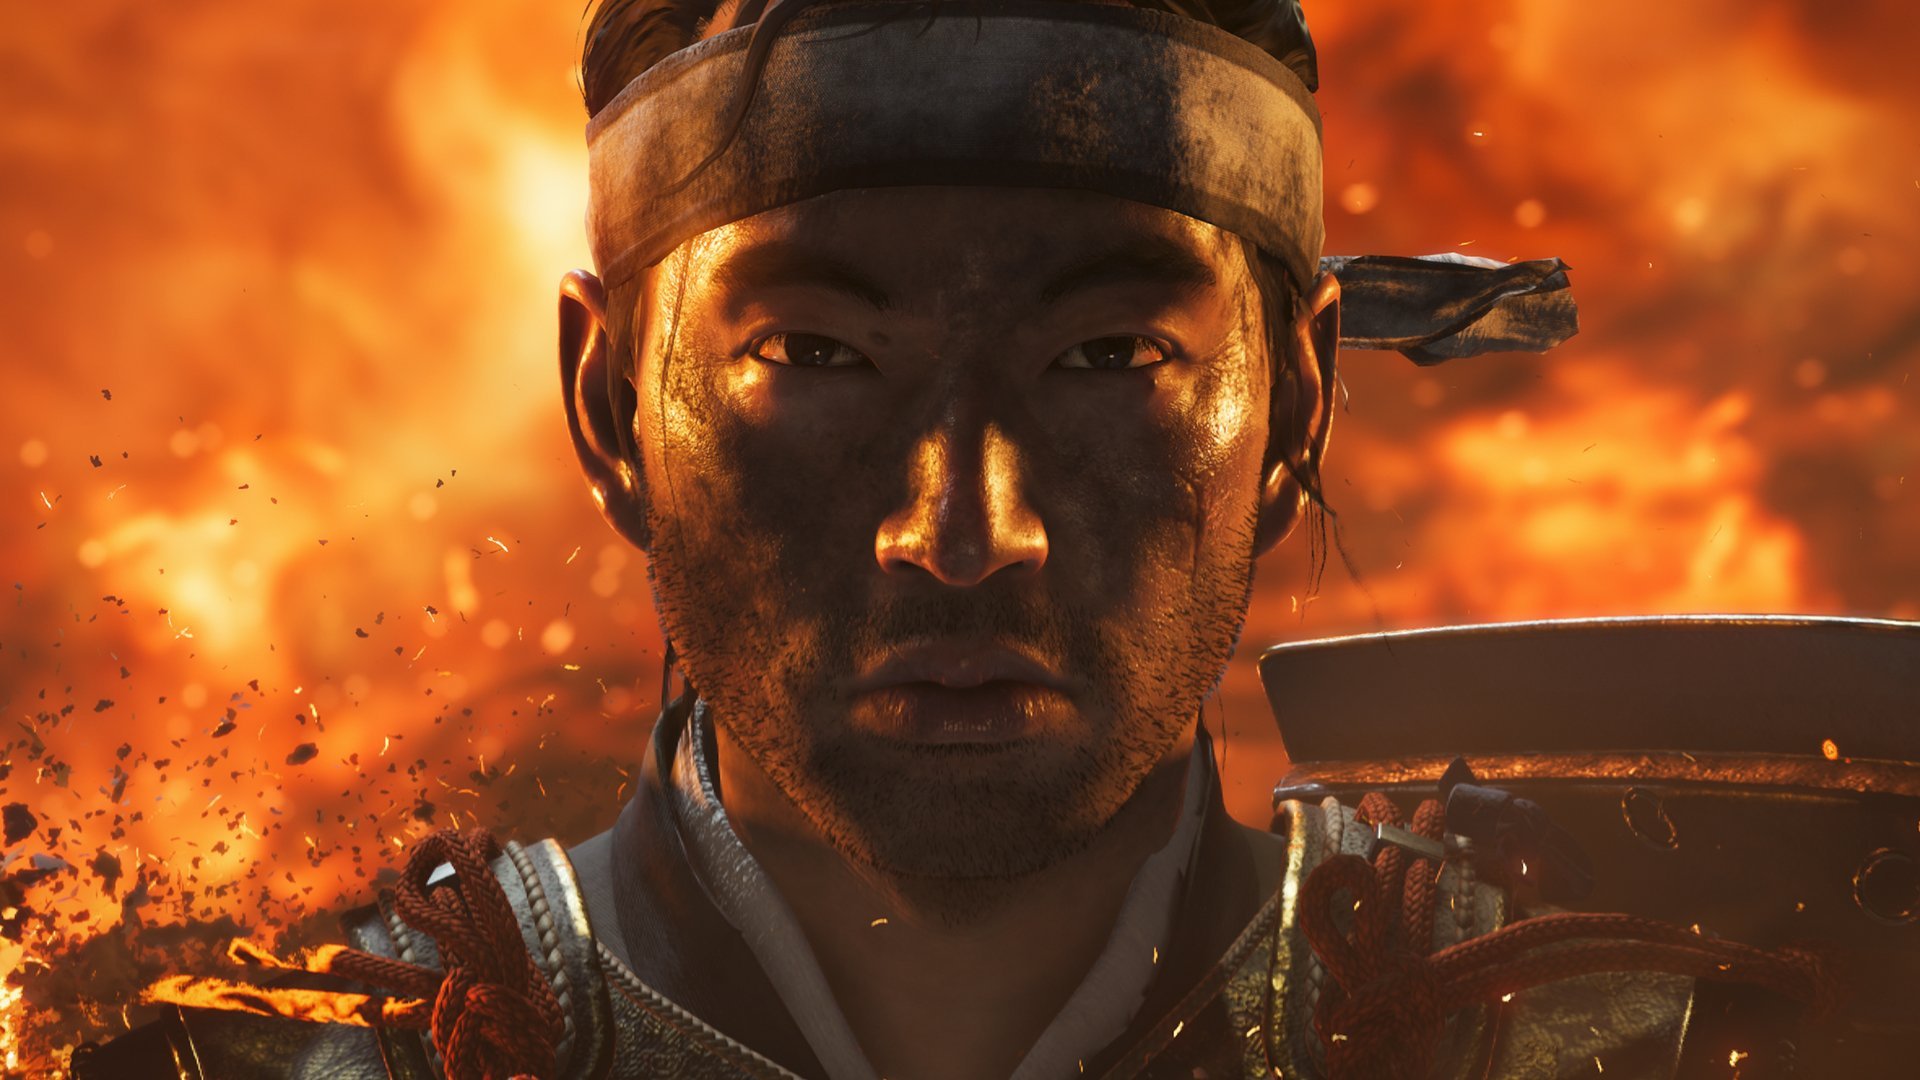 ghost of tsushima ps4 pre order